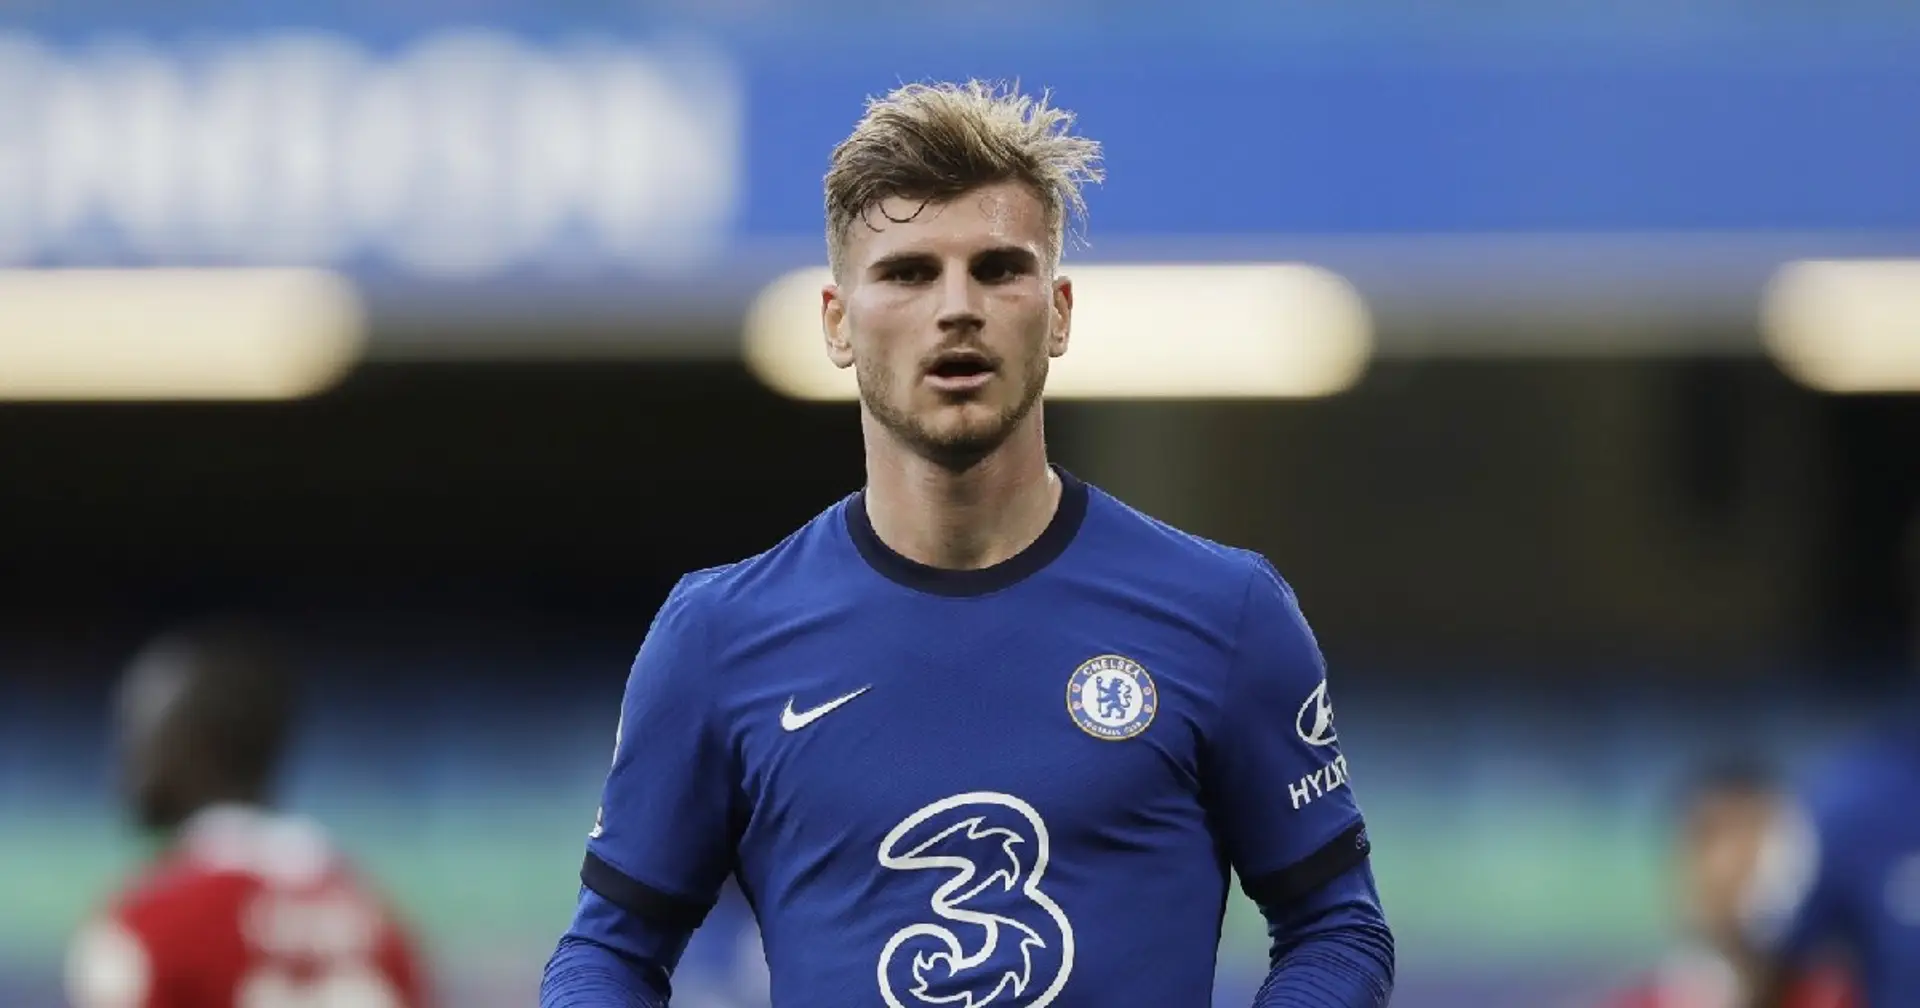 'I have become more robust': Werner talks about adjusting to life in the Premier League 